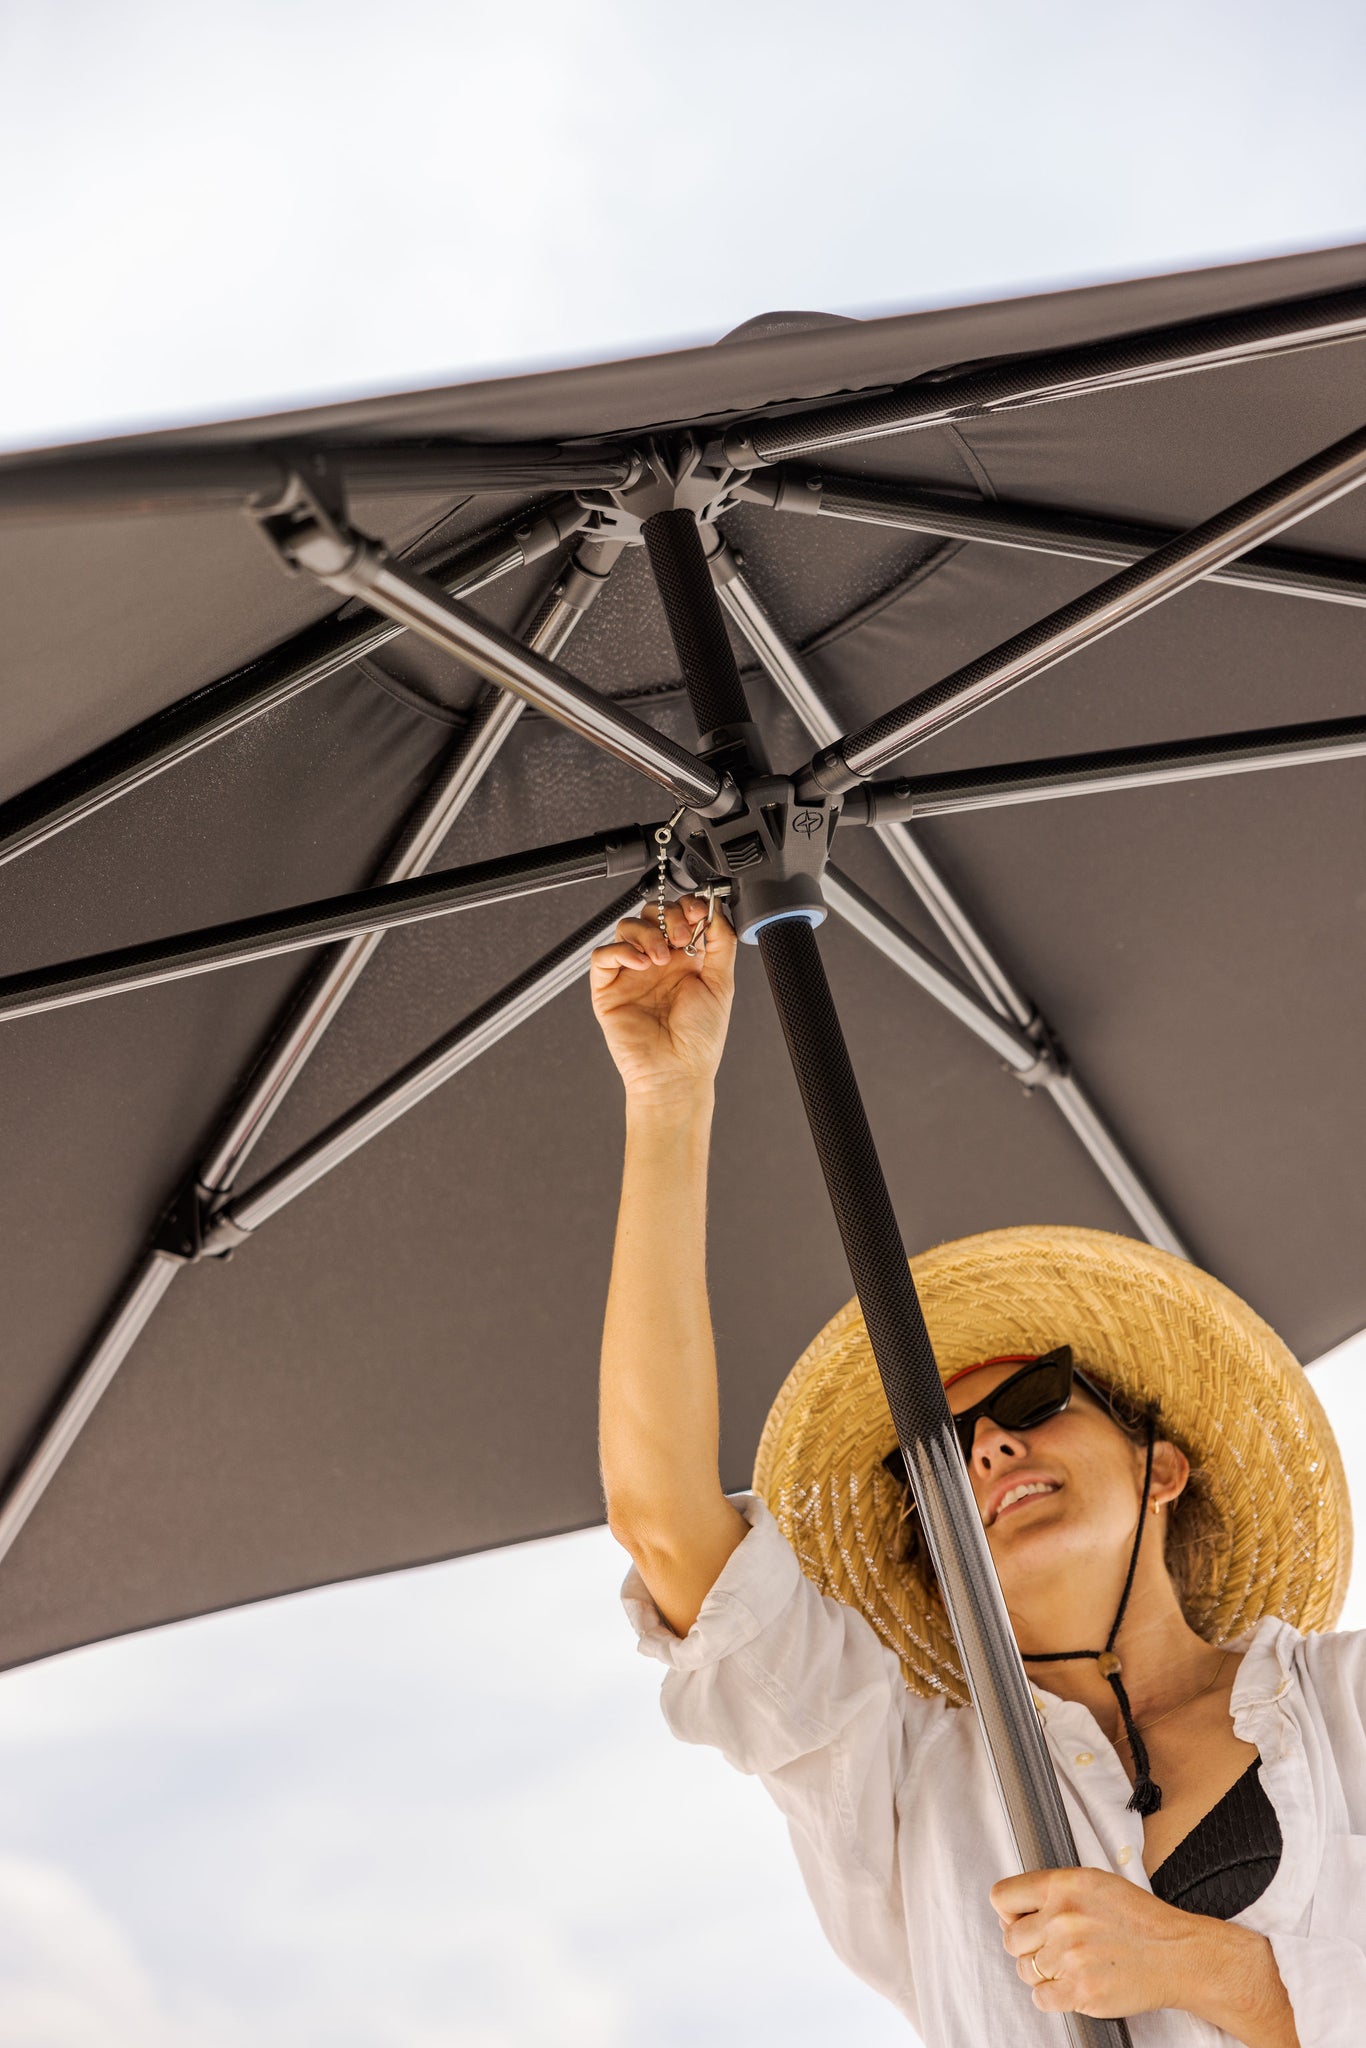 Why You Must Have a Heavy Duty Boat Umbrella - Born Again Boating